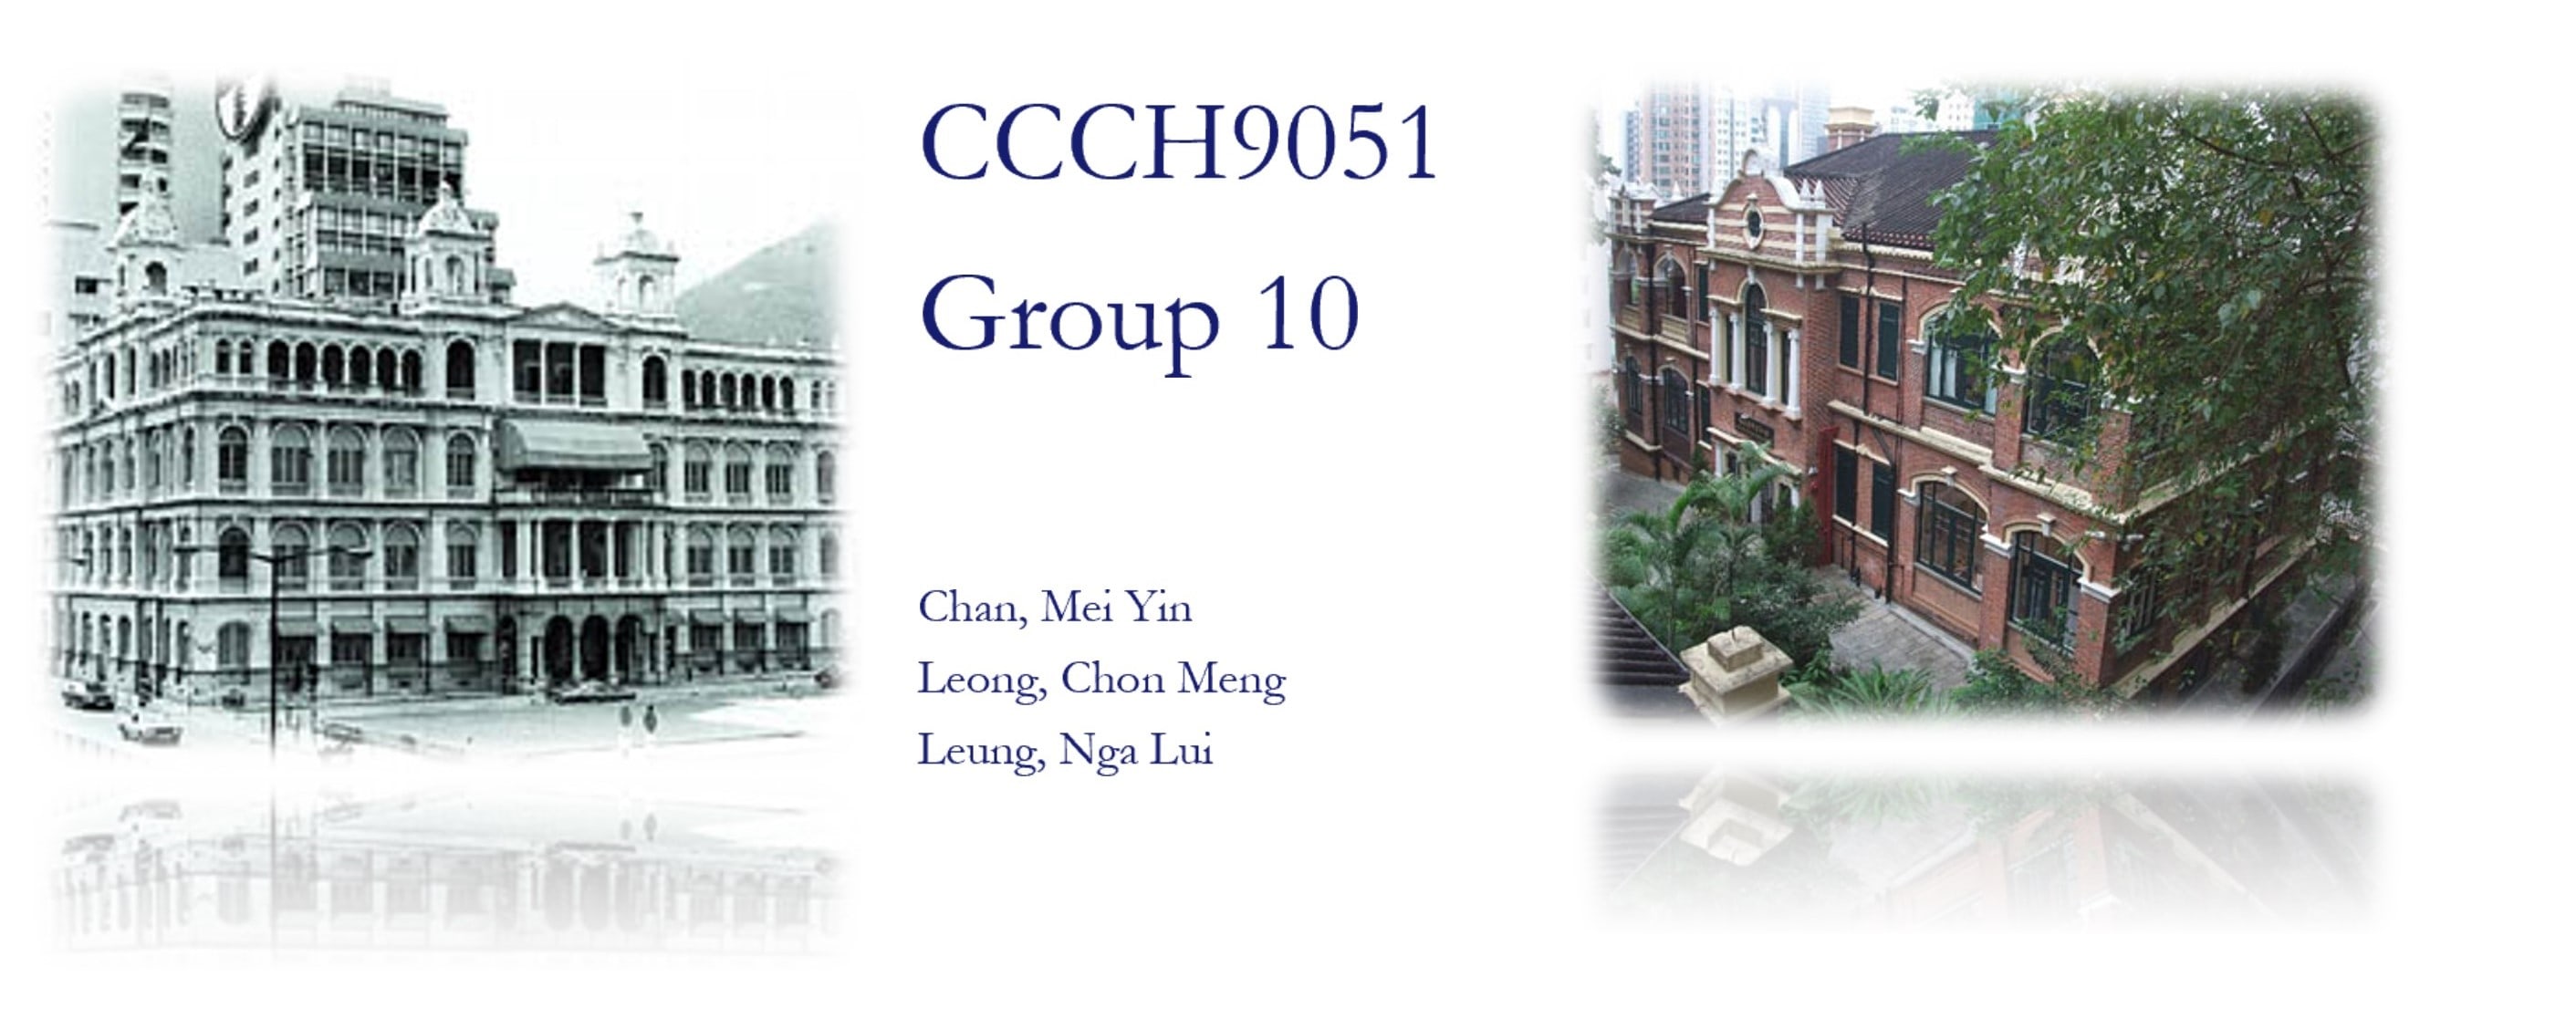 CCCH9051 Group 10